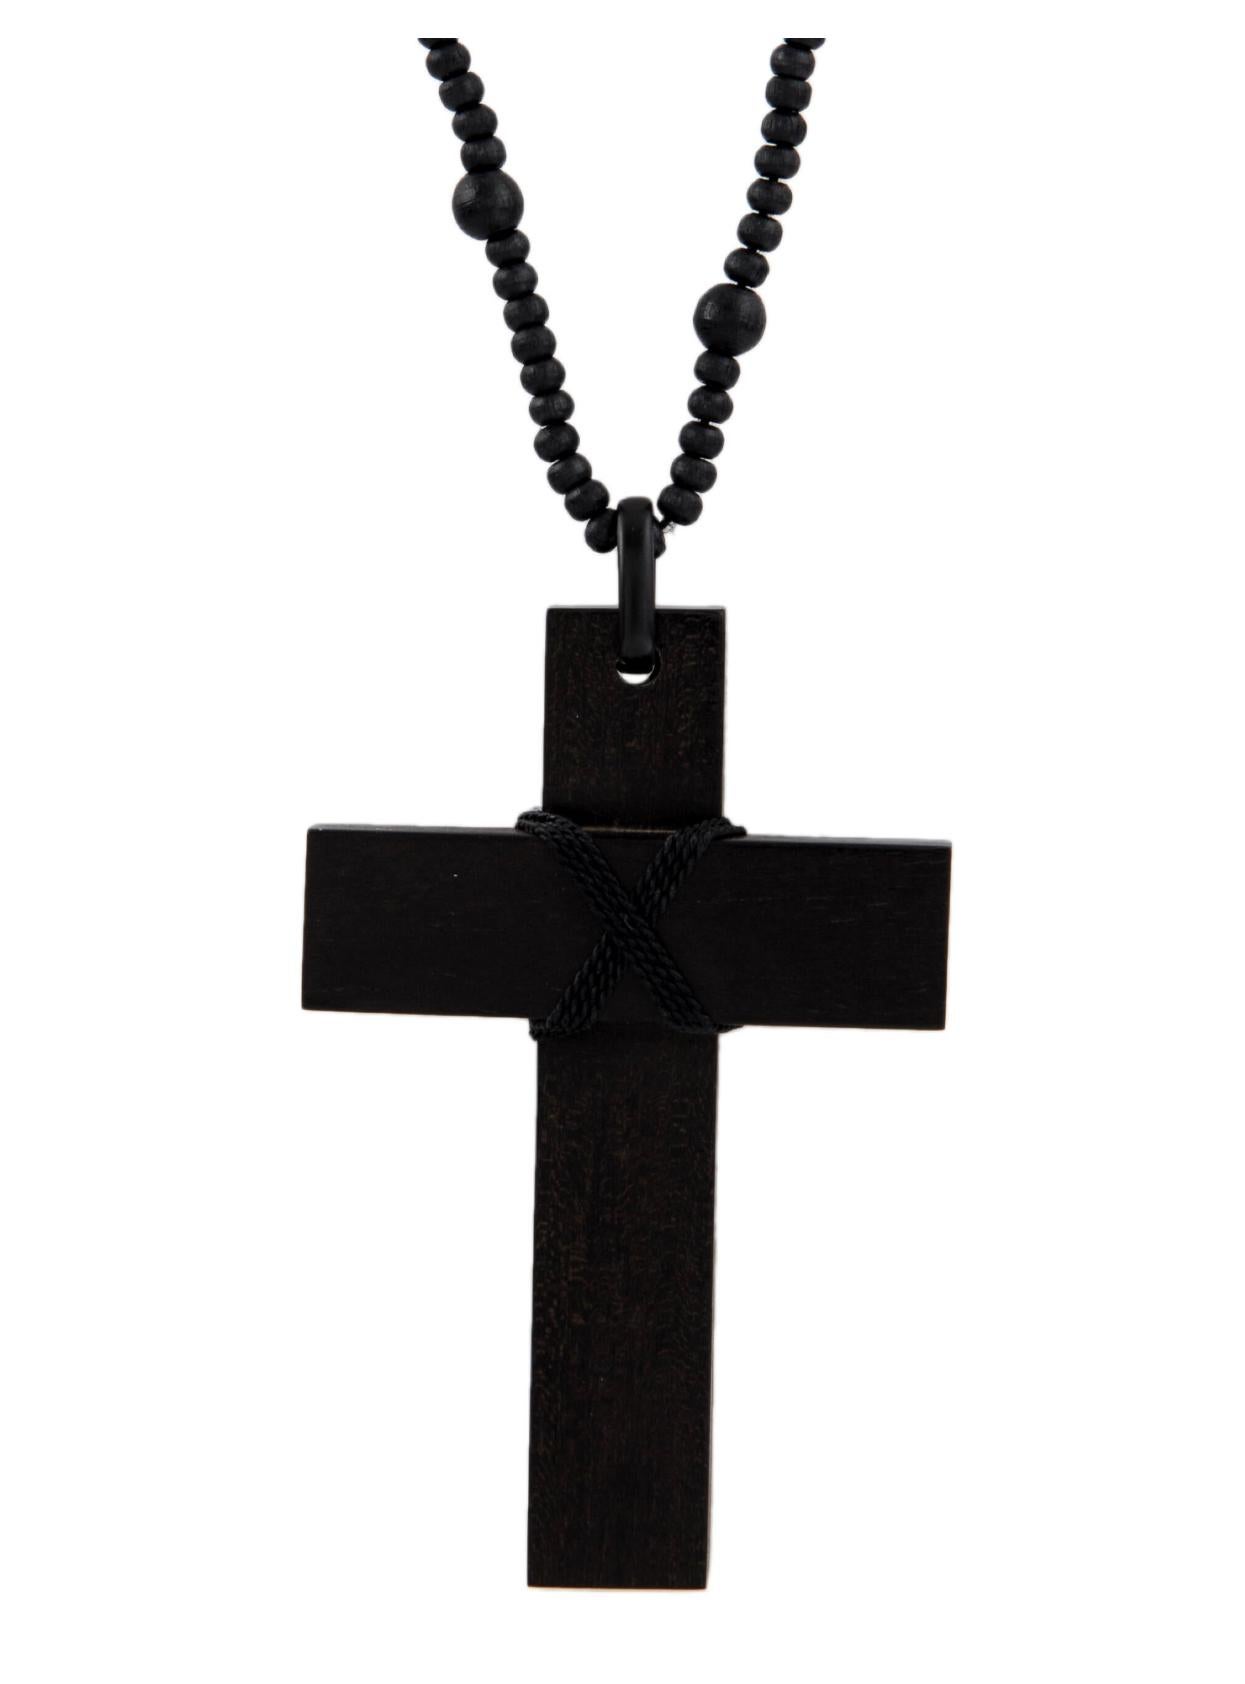 2002 GUCCI by Tom Ford Ebony Cross Choker

Rosary style, long beaded necklace can be wrapped around for choker

Condition: Excellent